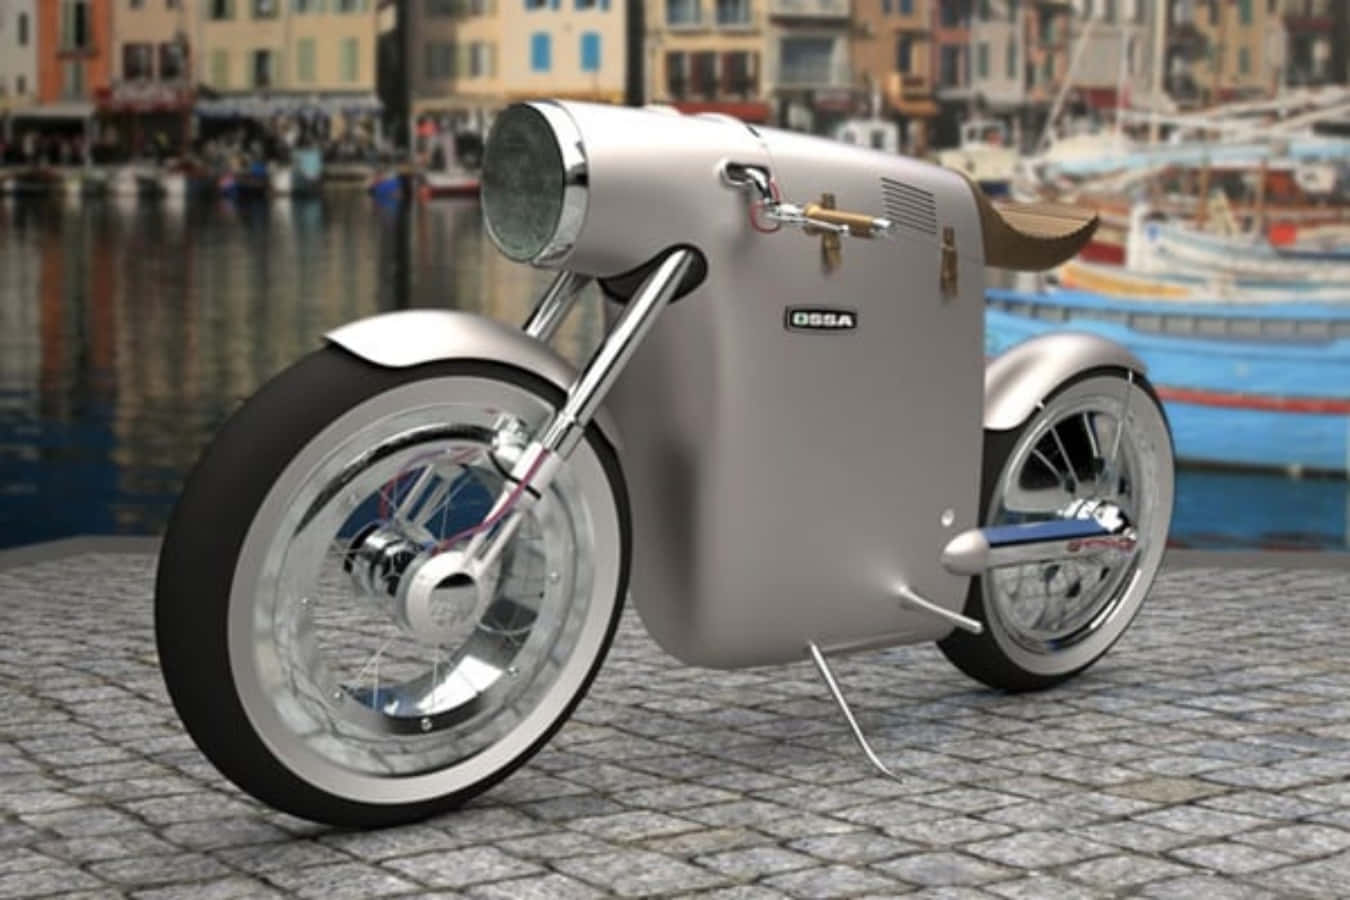 Ossa Motorcycle Concept By Harbor Wallpaper